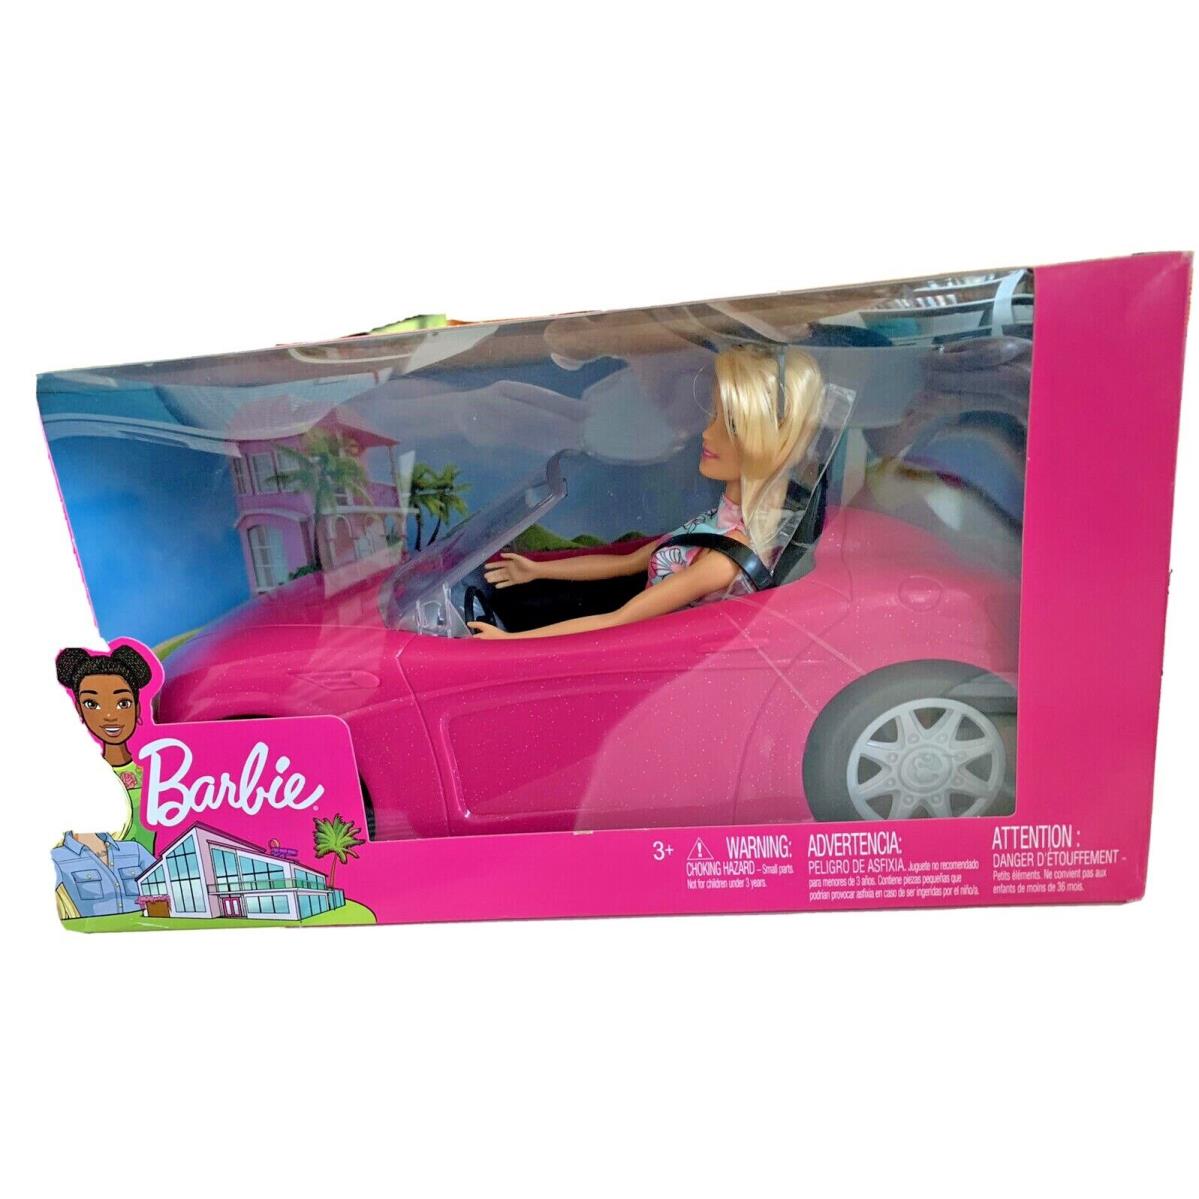 2018 Barbie Doll Convertible Pink Glam Car Doll Playset Mattel Boxed FPR57